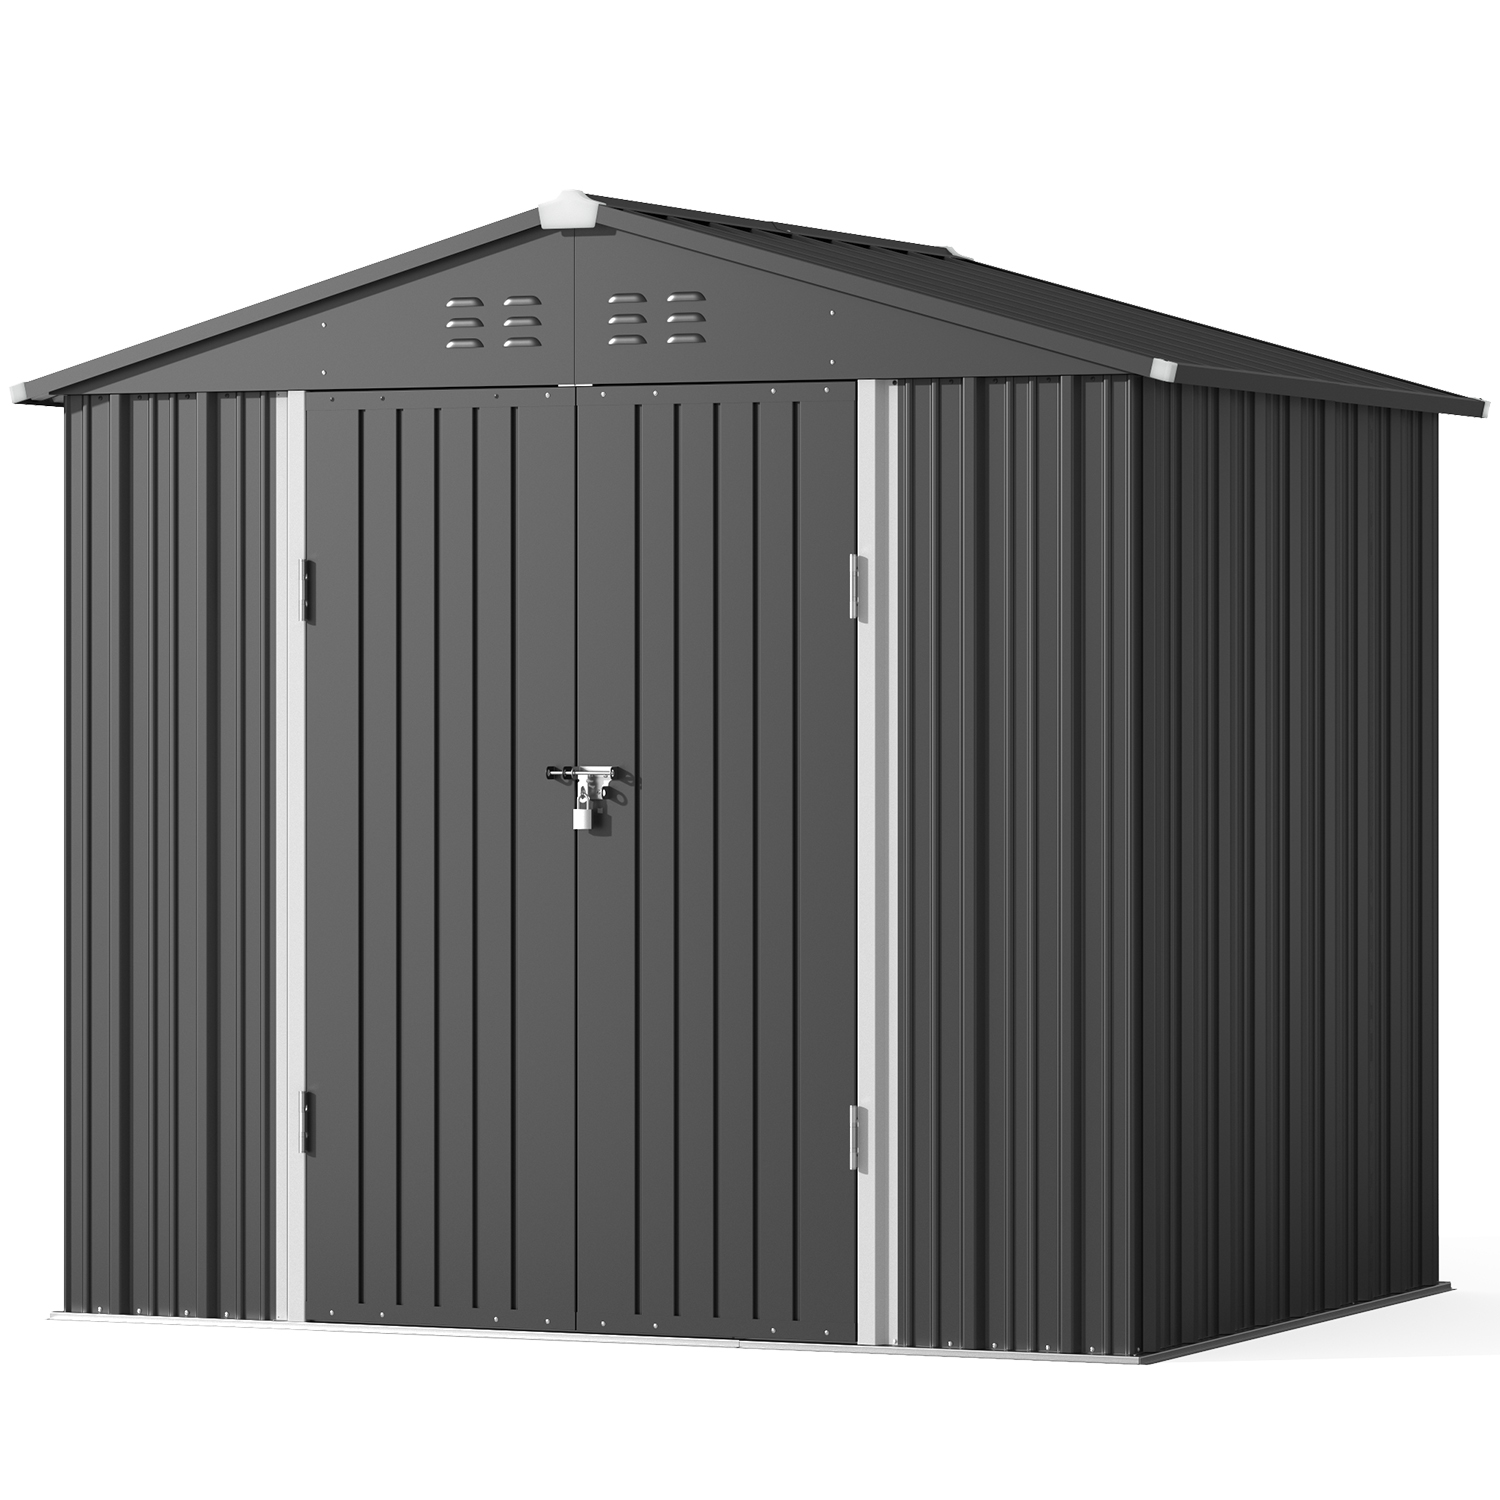 Lofka 8 x 6 FT Metal  Outdoor Storage Shed with Double Lockable Doors and Air Vents for Patio, Garden, Backyard, Lawn, Dark Gray - image 1 of 7